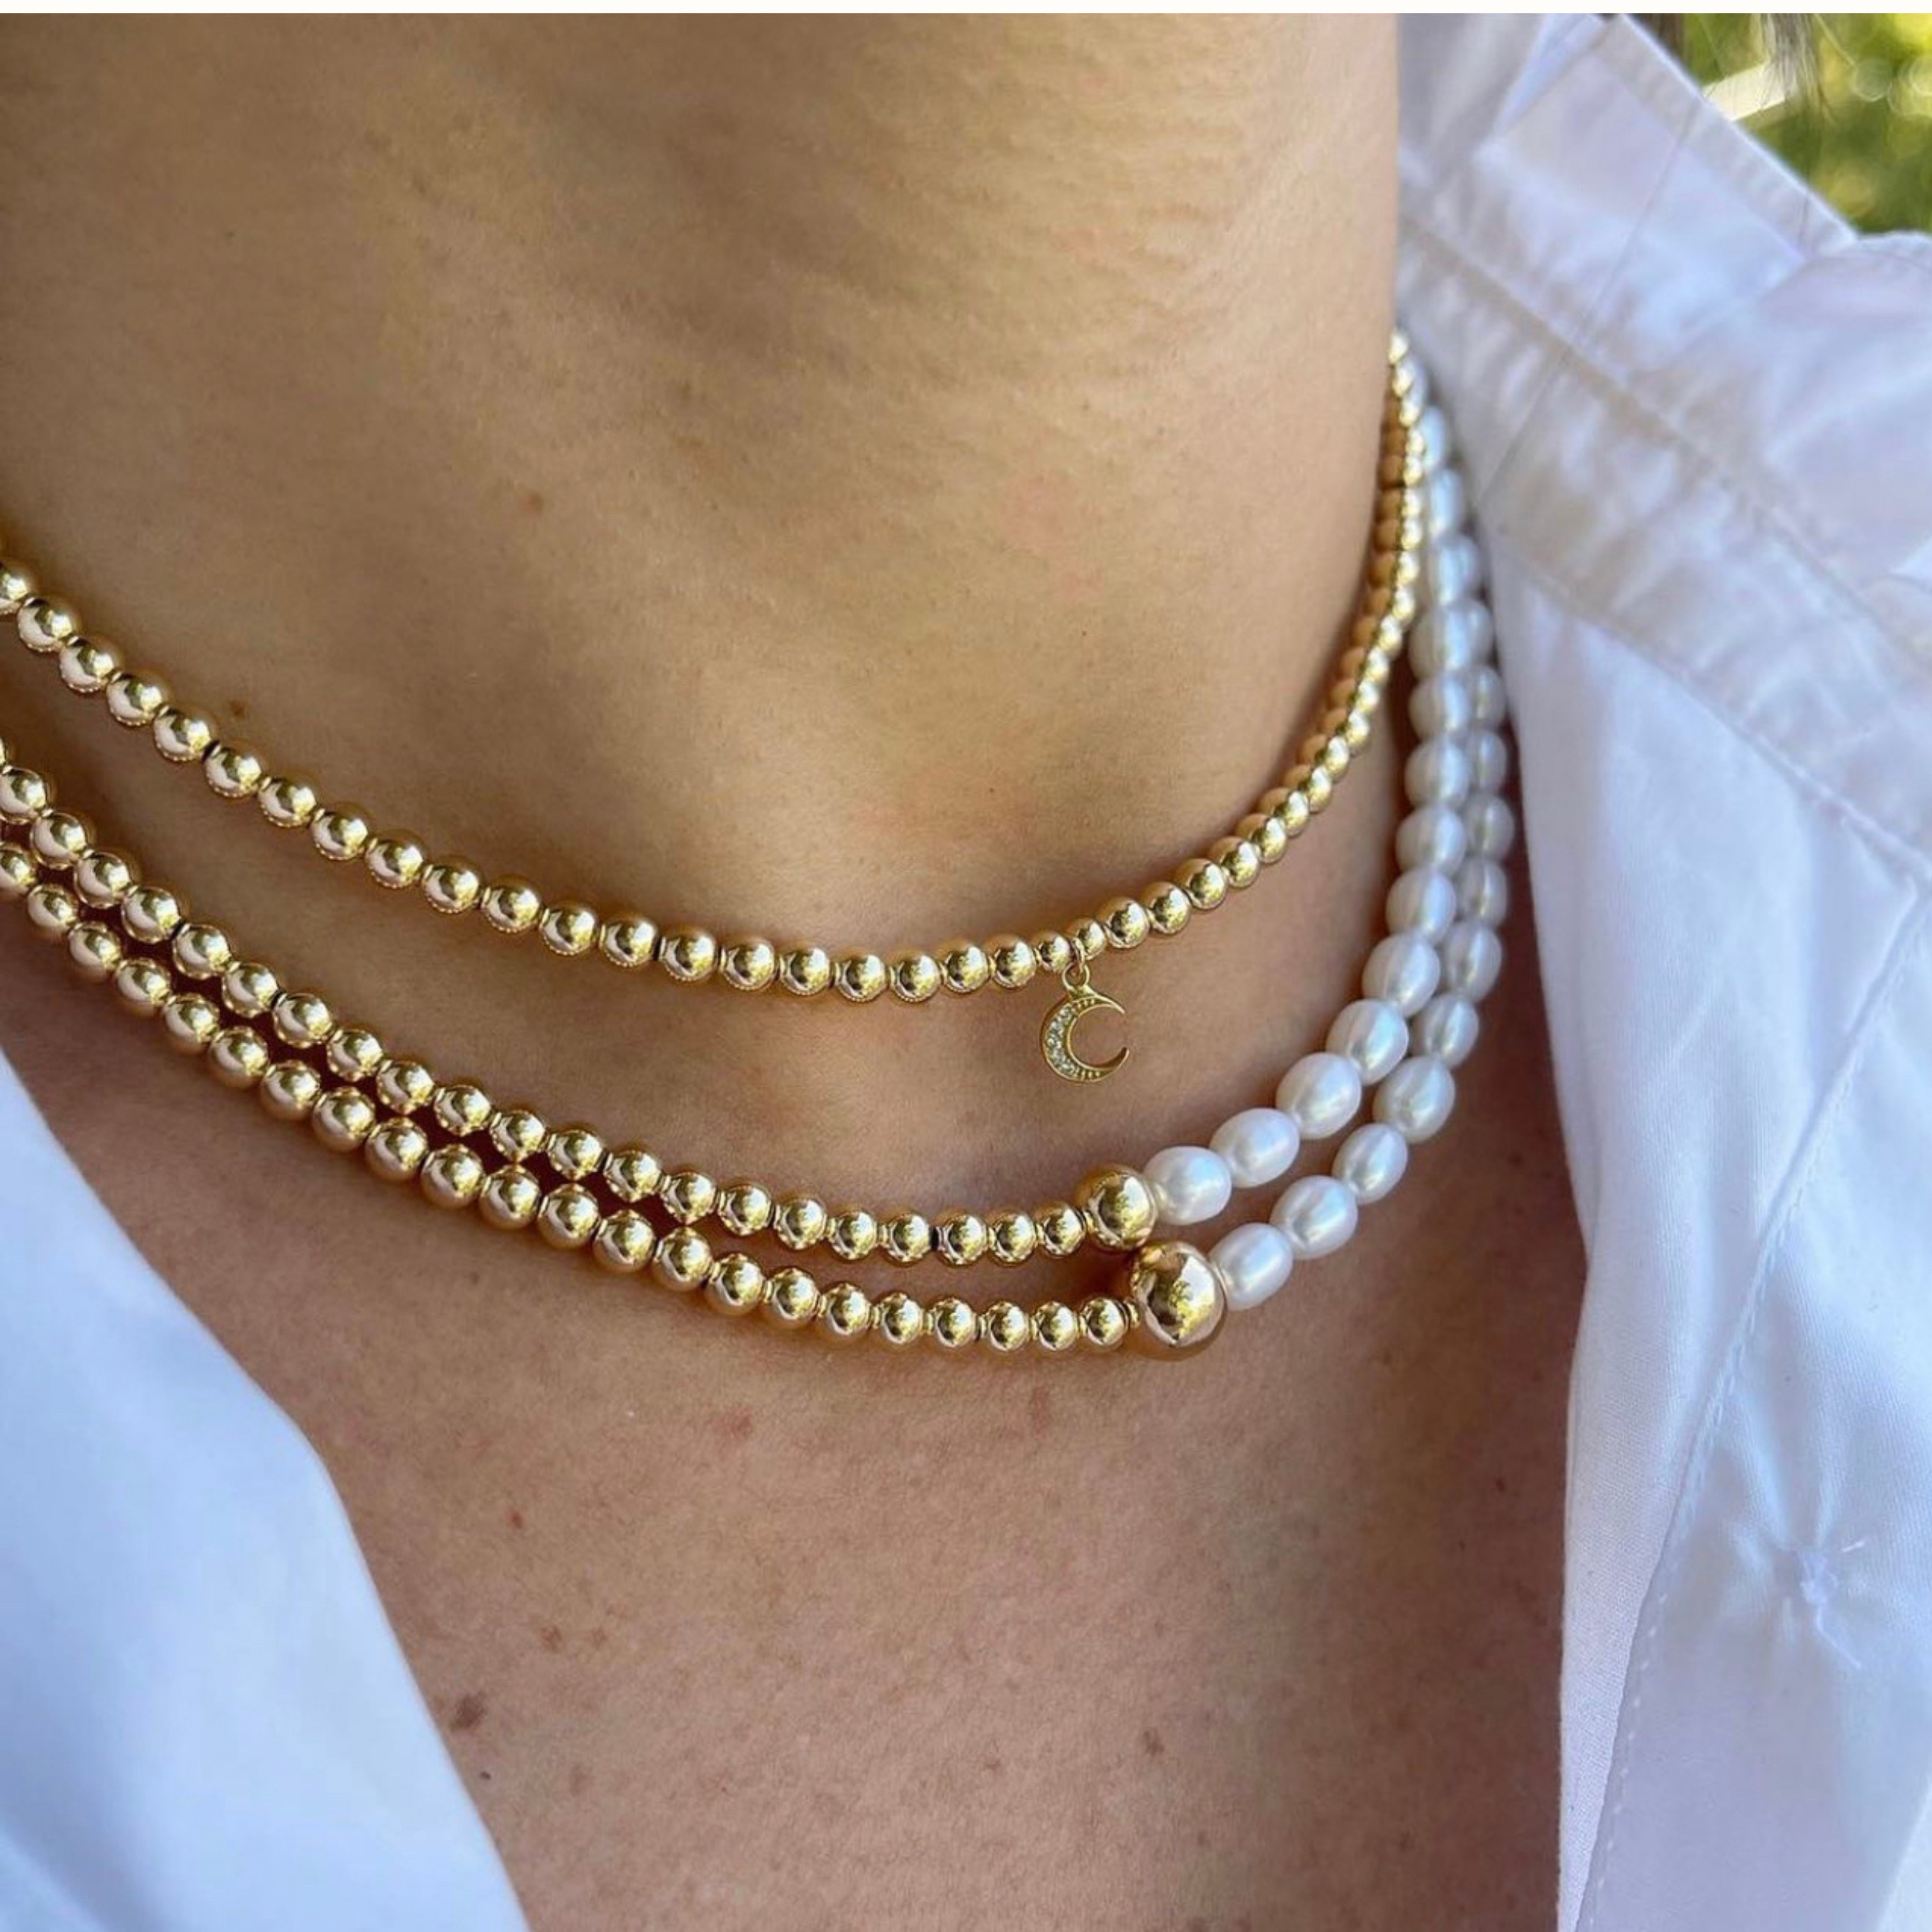 Necklace with coin freshwater pearls on silver belcher chain – Sally Napier  Jewellery